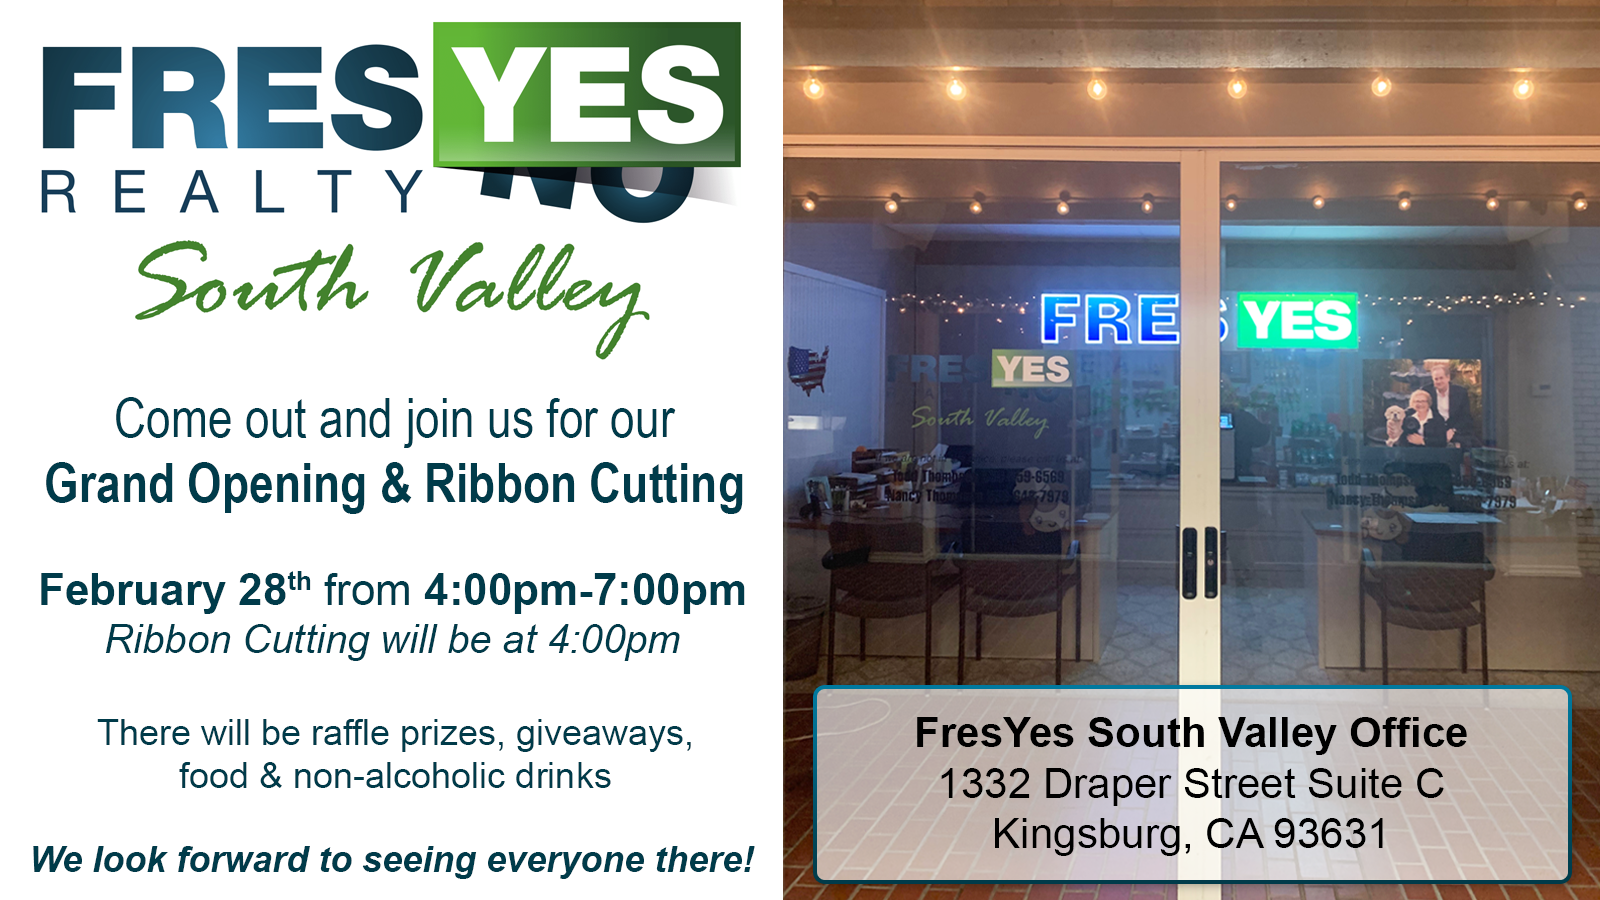 FresYes Realty Expands to Kingsburg